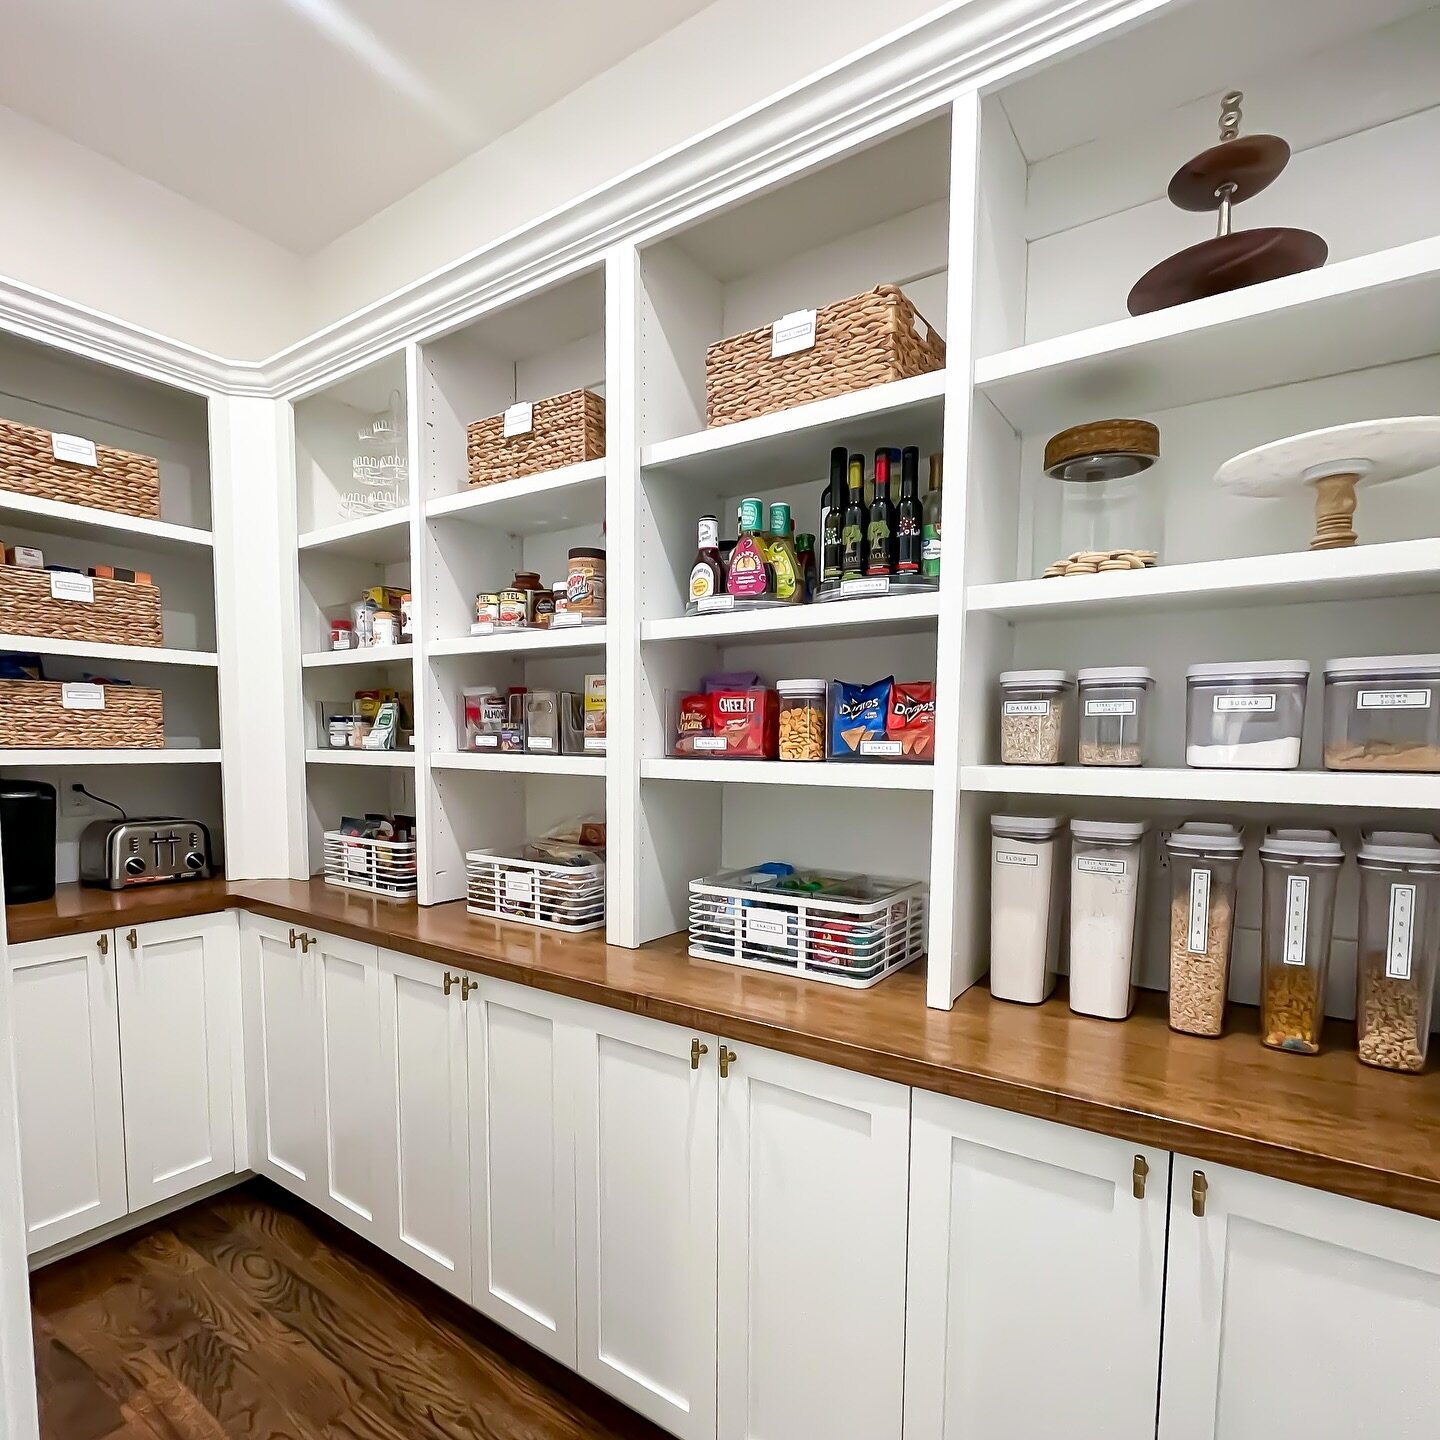 With every pantry project, we focus on visibility and accessibility.

&bull; No more lost items expiring or going to waste 
&bull; Quick to see what is running low
&bull; Less overbuying
&bull; Easy meal planning 
&bull; Inspired to cook with items y